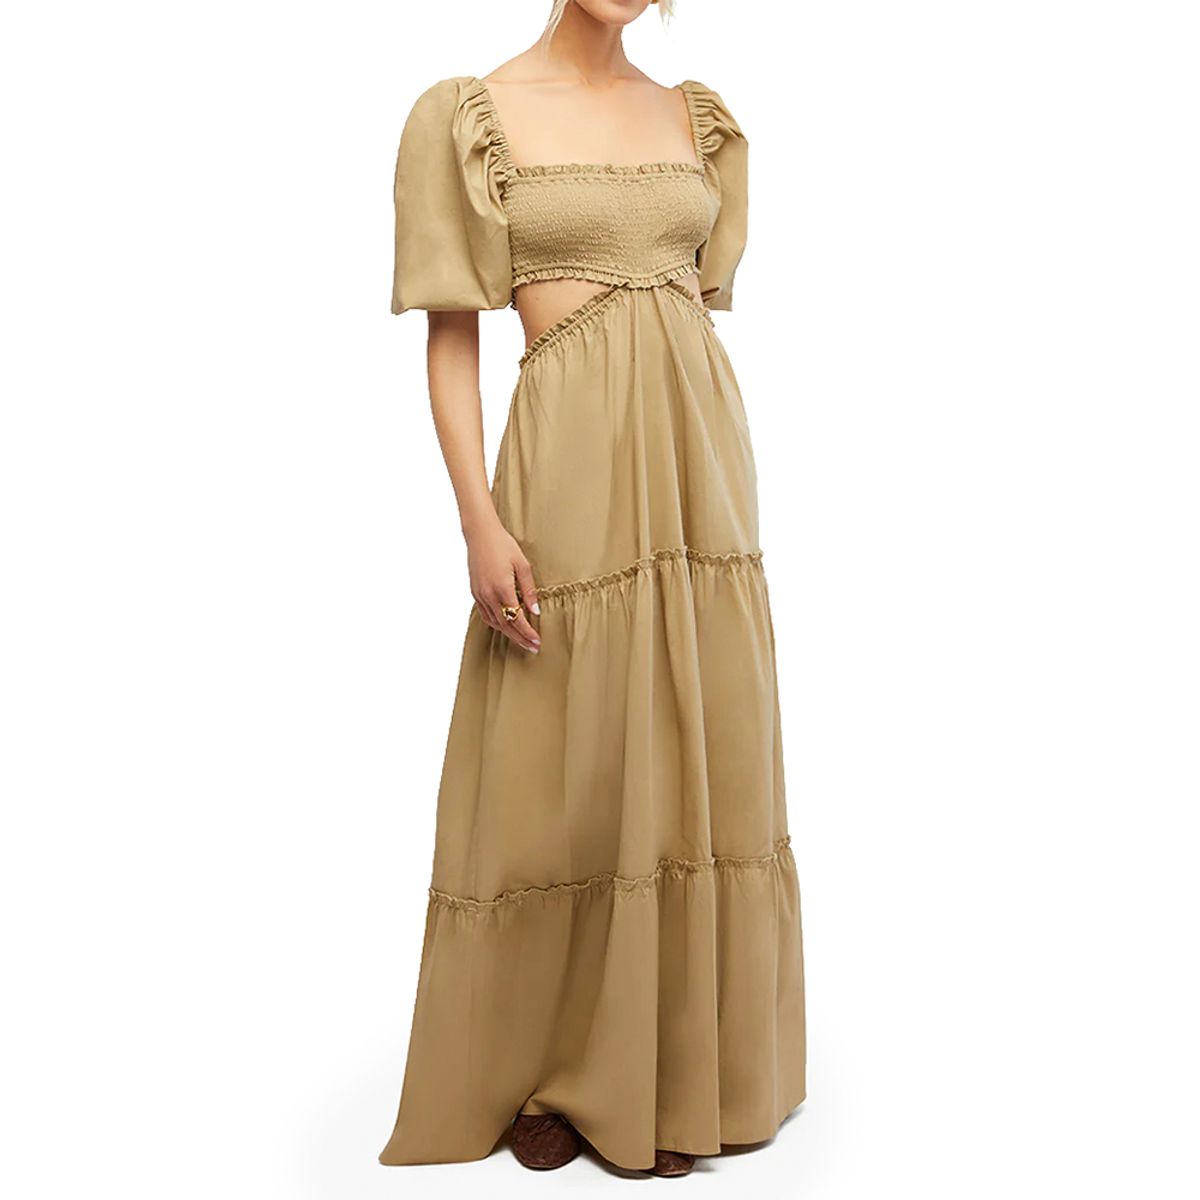 WeWoreWhat- Smocked Cut Out Maxi Dress